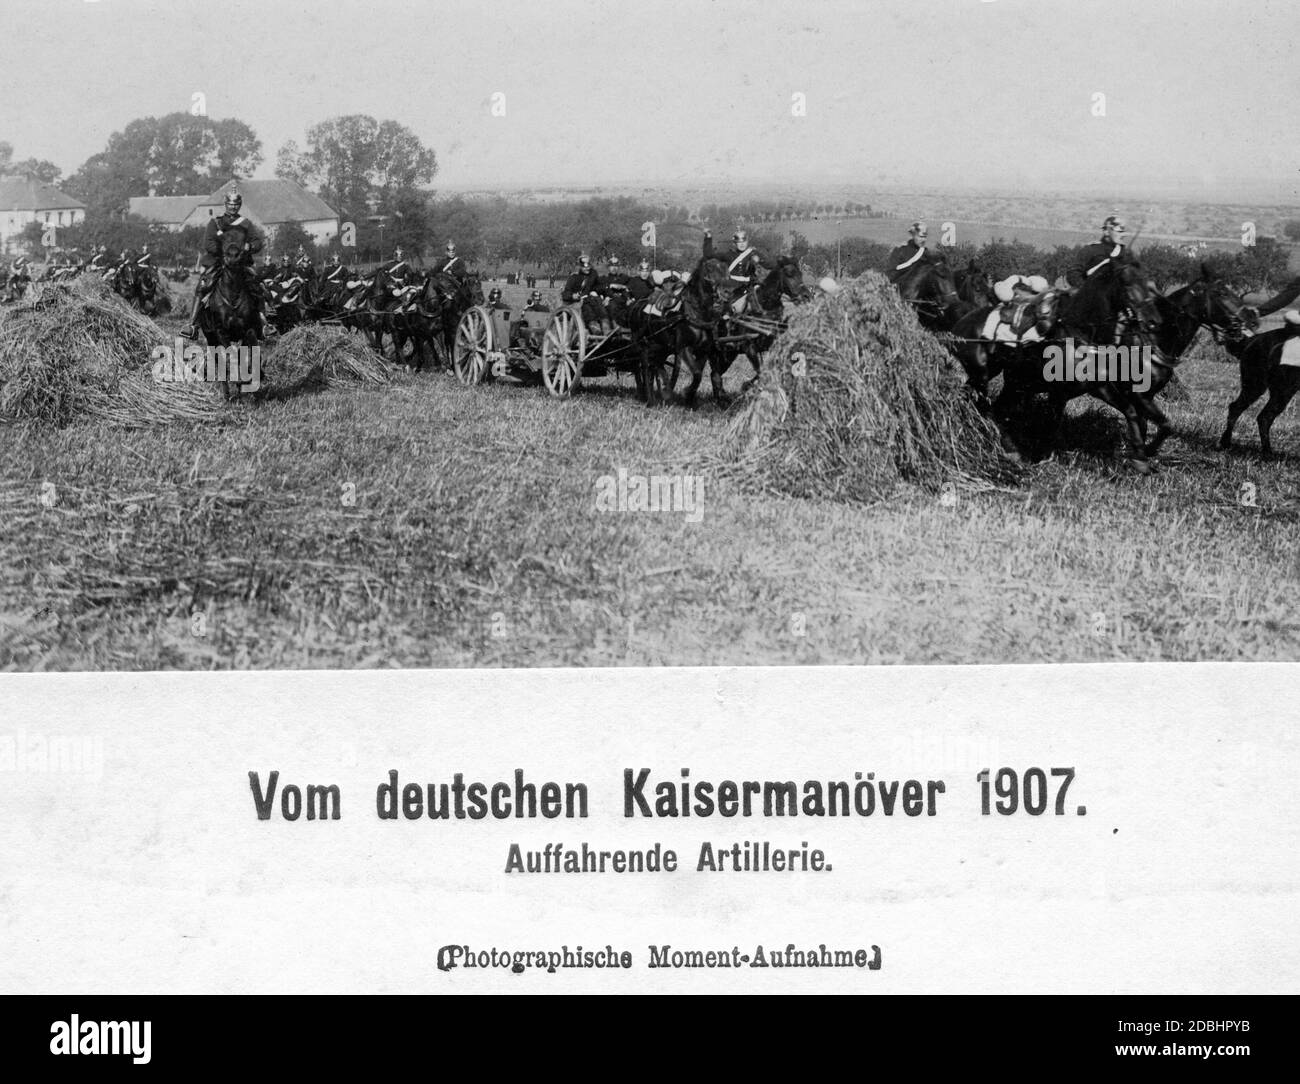 Artillery on the move during the German Imperial Manoeuvre of 1907. Stock Photo